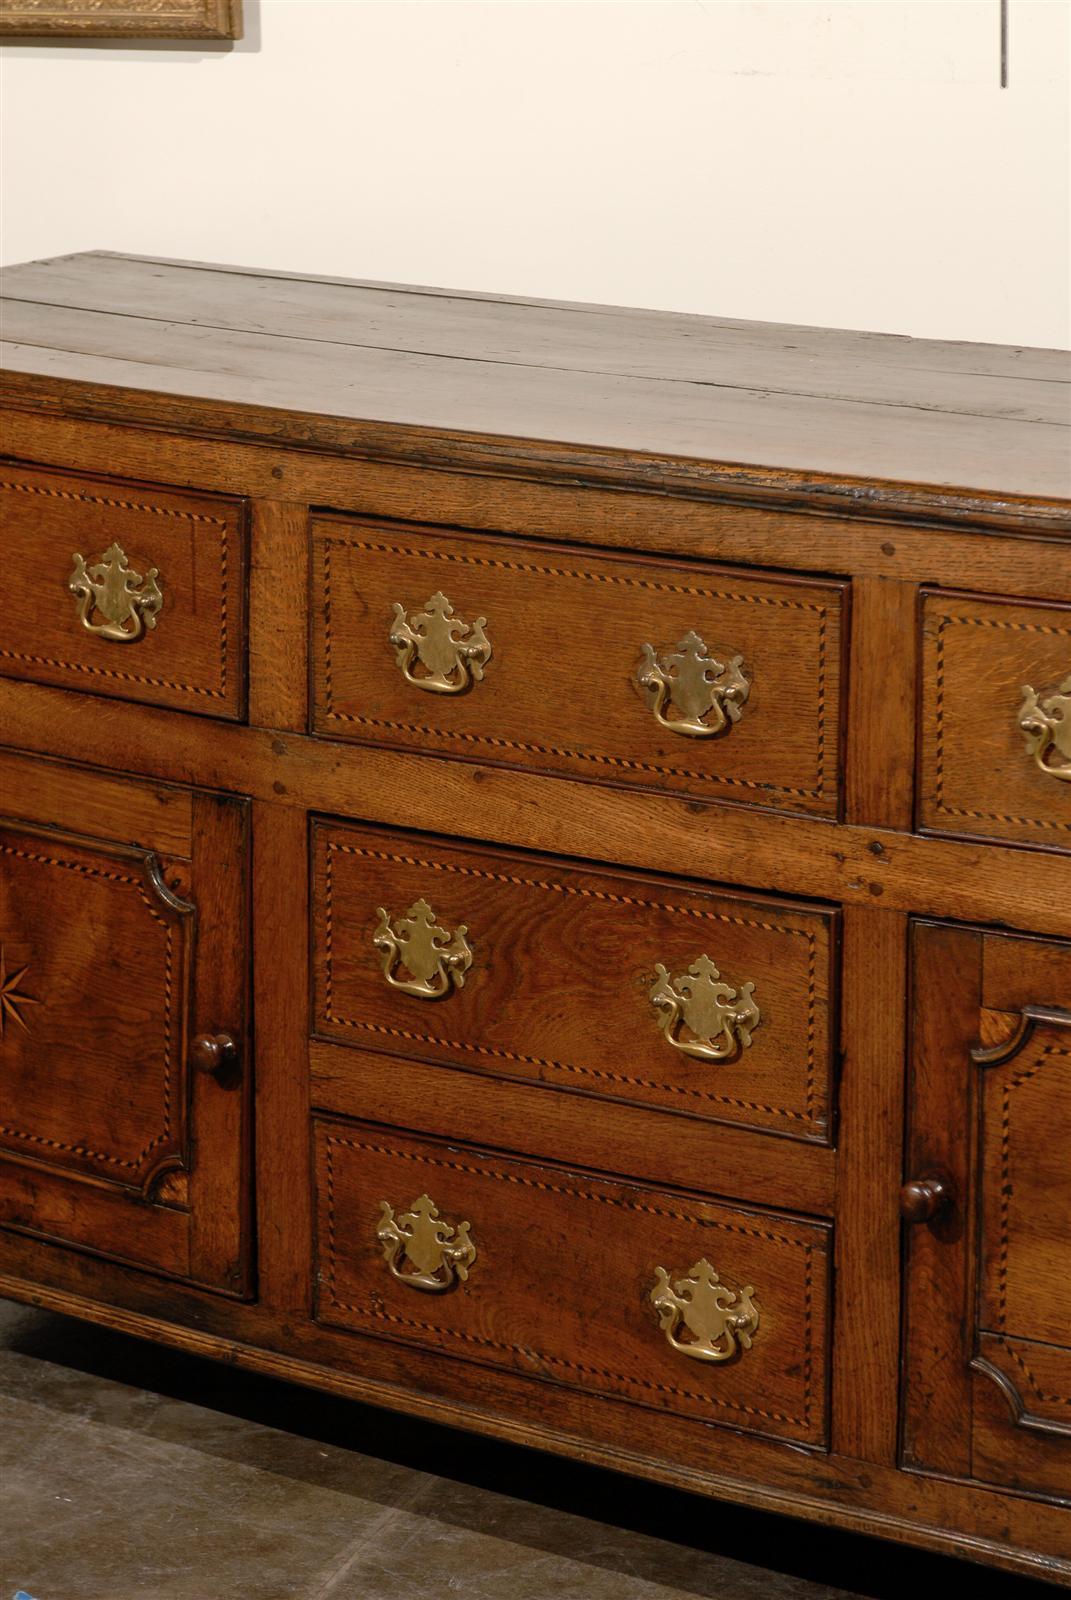 18th Century 1780s English George III Period Oak Server with Inlaid Decor, Doors and Drawers